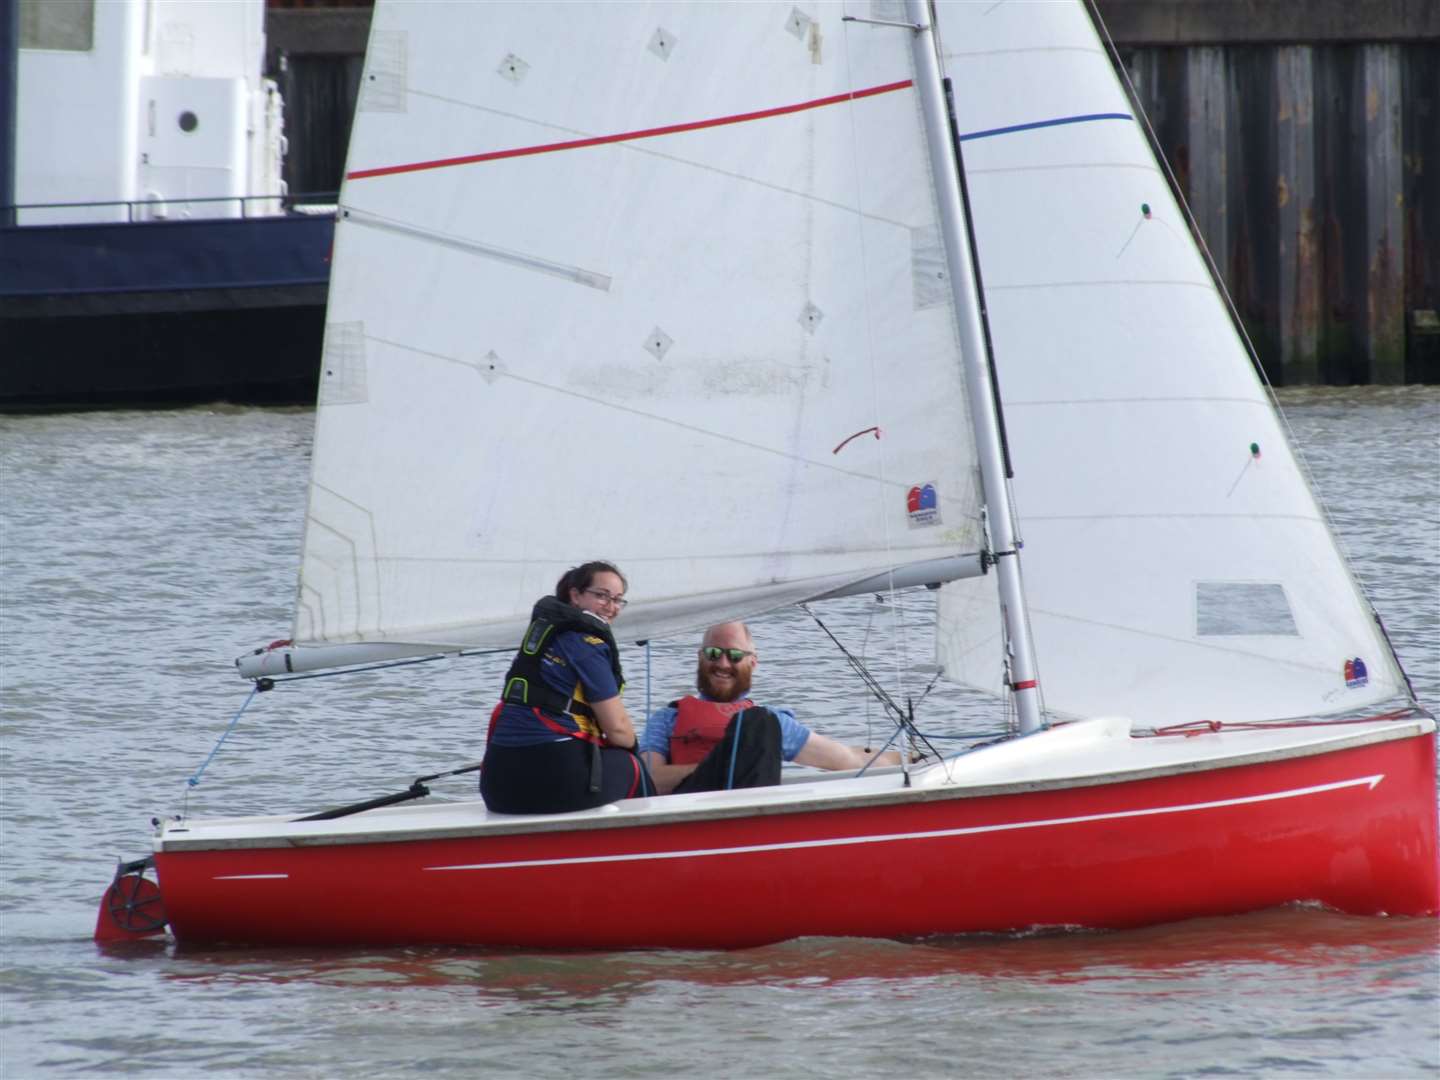 Harriet Davies-Mullan out on the water.